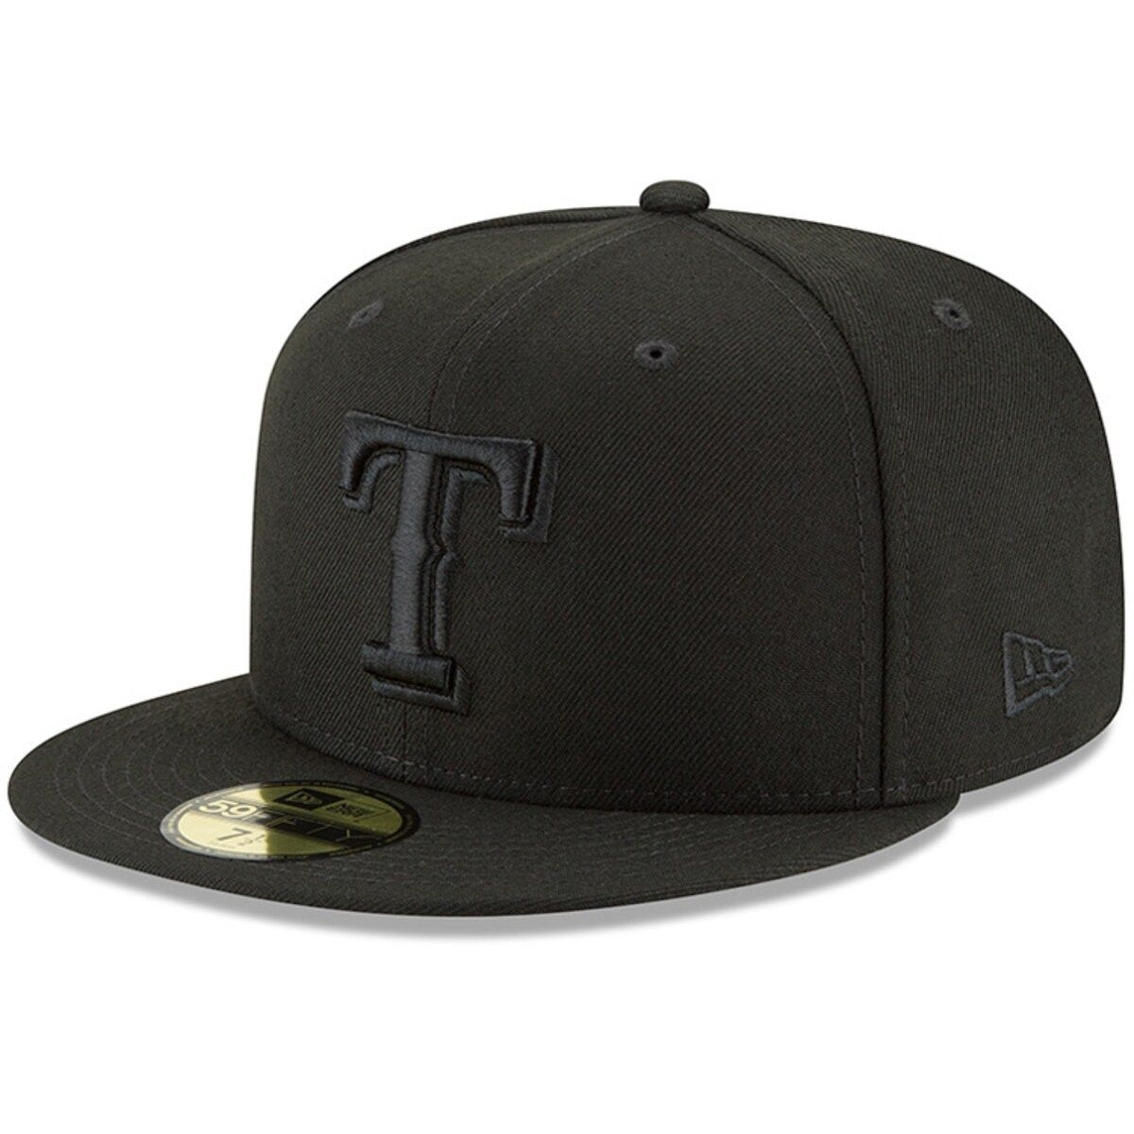 New Era Men's Black Texas Rangers Primary Logo Basic 59FIFTY Fitted Hat - Image 2 of 4